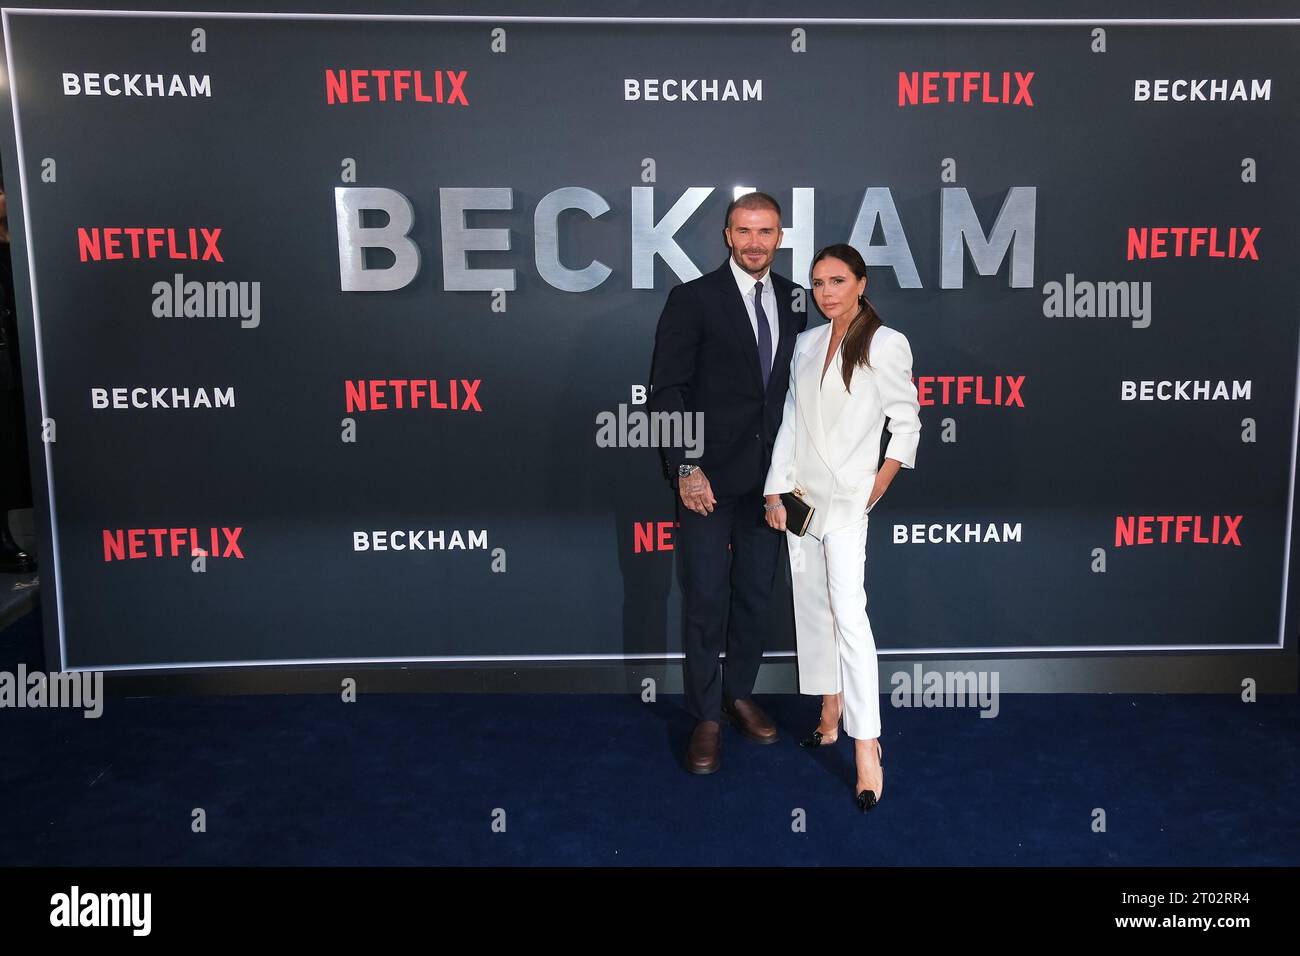 London, UK. 3rd Oct, 2023. David Beckham and Victoria Beckham photographed during The Premiere of Beckham - episodes 1 & 2 at the Curzon Mayfair. Picture by Julie Edwards Credit: JEP Celebrity Photos/Alamy Live News Stock Photo